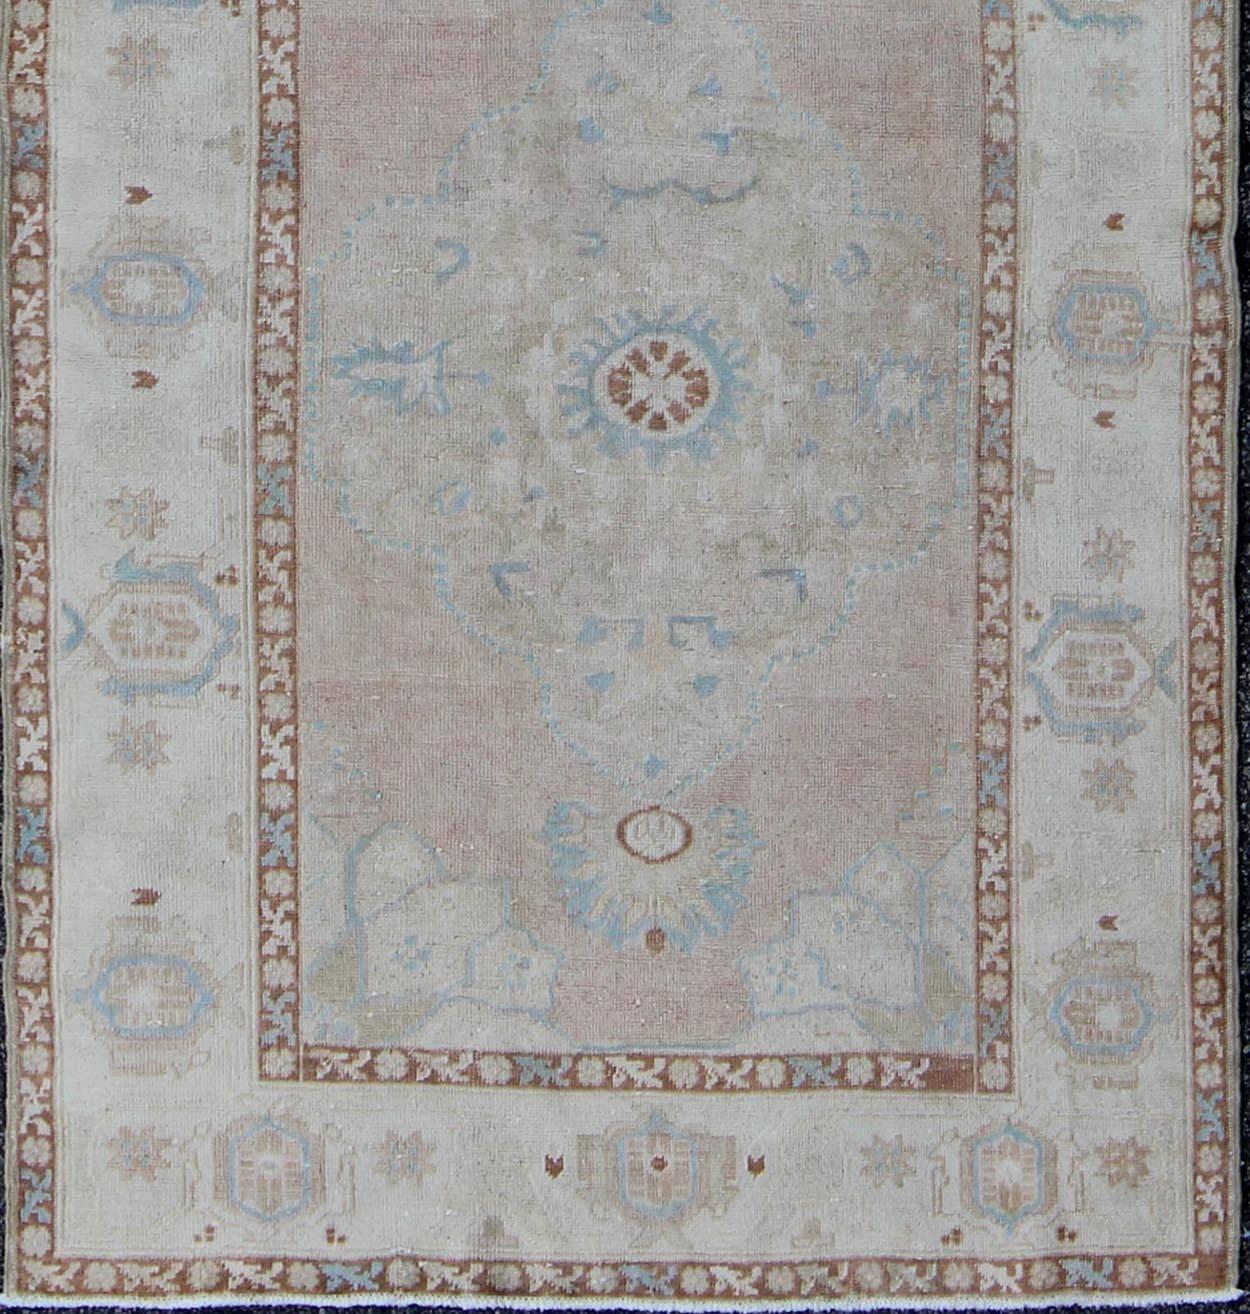 Pale pink, teal and ivory vintage Turkish Oushak runner with three medallions, rug na-63085, country of origin / type: Turkey / Oushak, circa 1930

This beautiful vintage Oushak runner from early 20th century Turkey features a classic Oushak